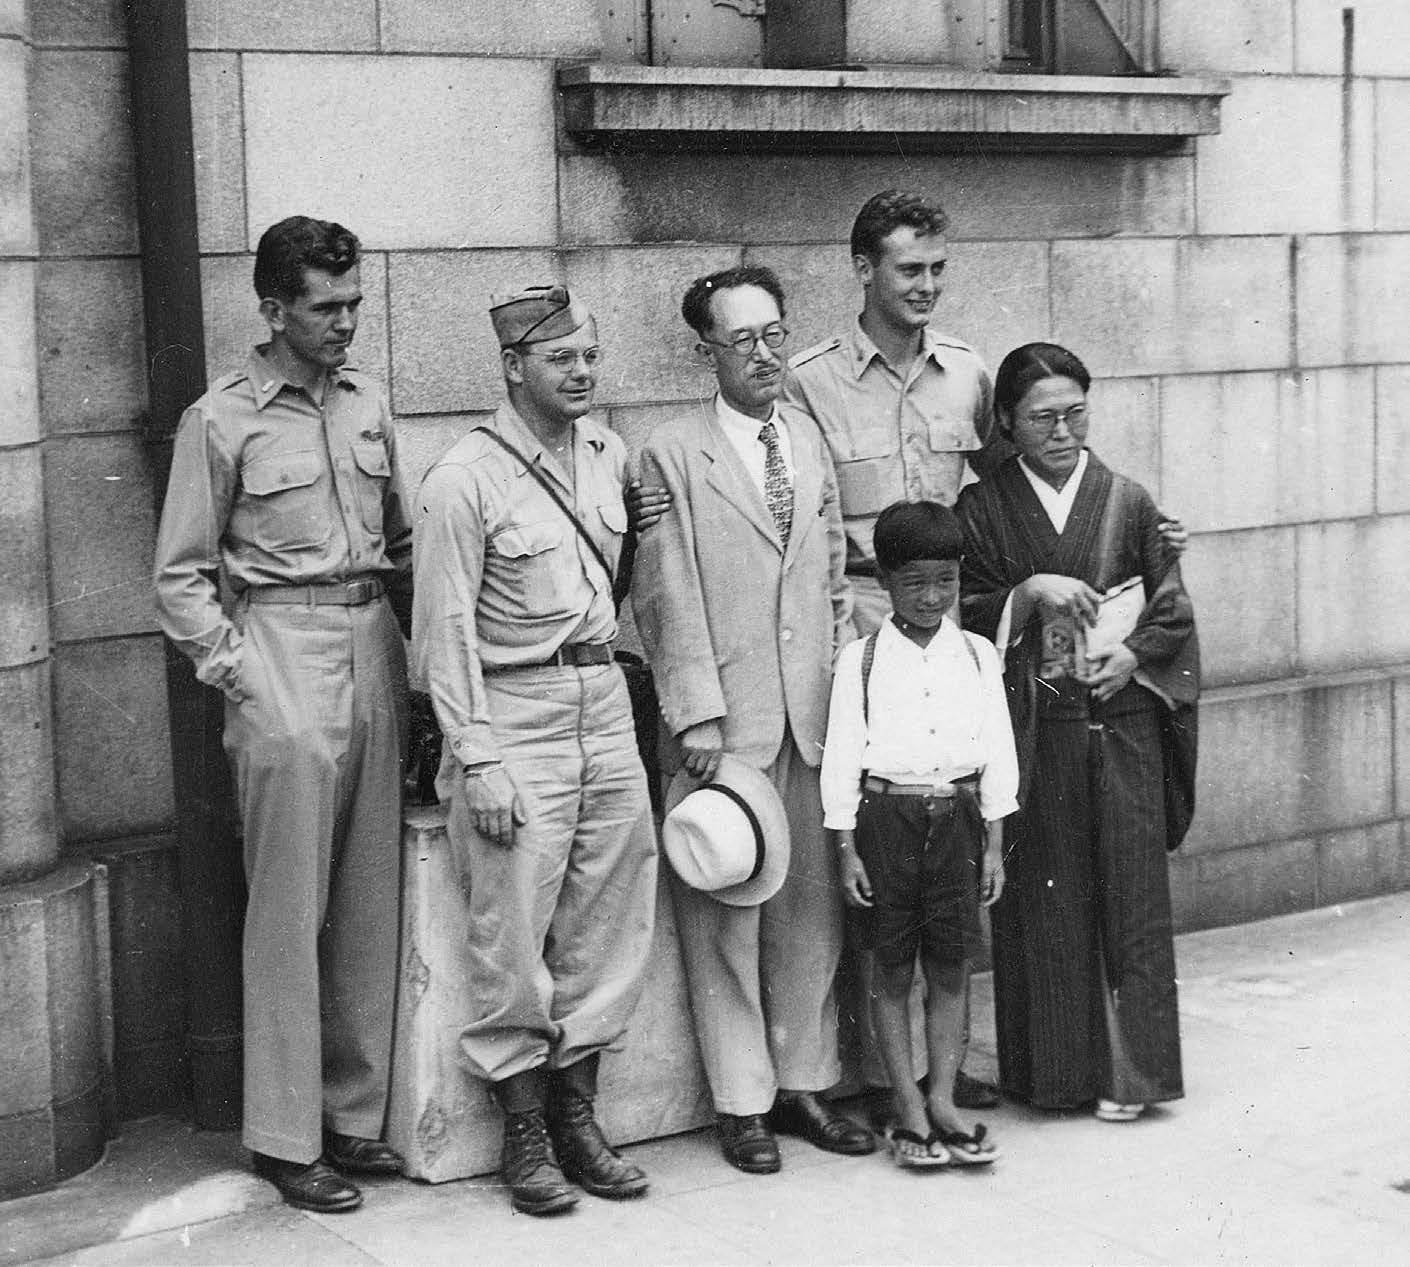 From left: Boyd K. Packer, Norman Nixon, Tatsui Sato, C. Elliott Richards, and Chiyo Sato with son Yasuo. The servicemen helped convert the Sato family, who were some of the first people to be baptized in Japan after World War II. Tatsui Sato would later translate the temple ceremony into Japanese. Photo courtesy of Chiyo Nelson Christensen.